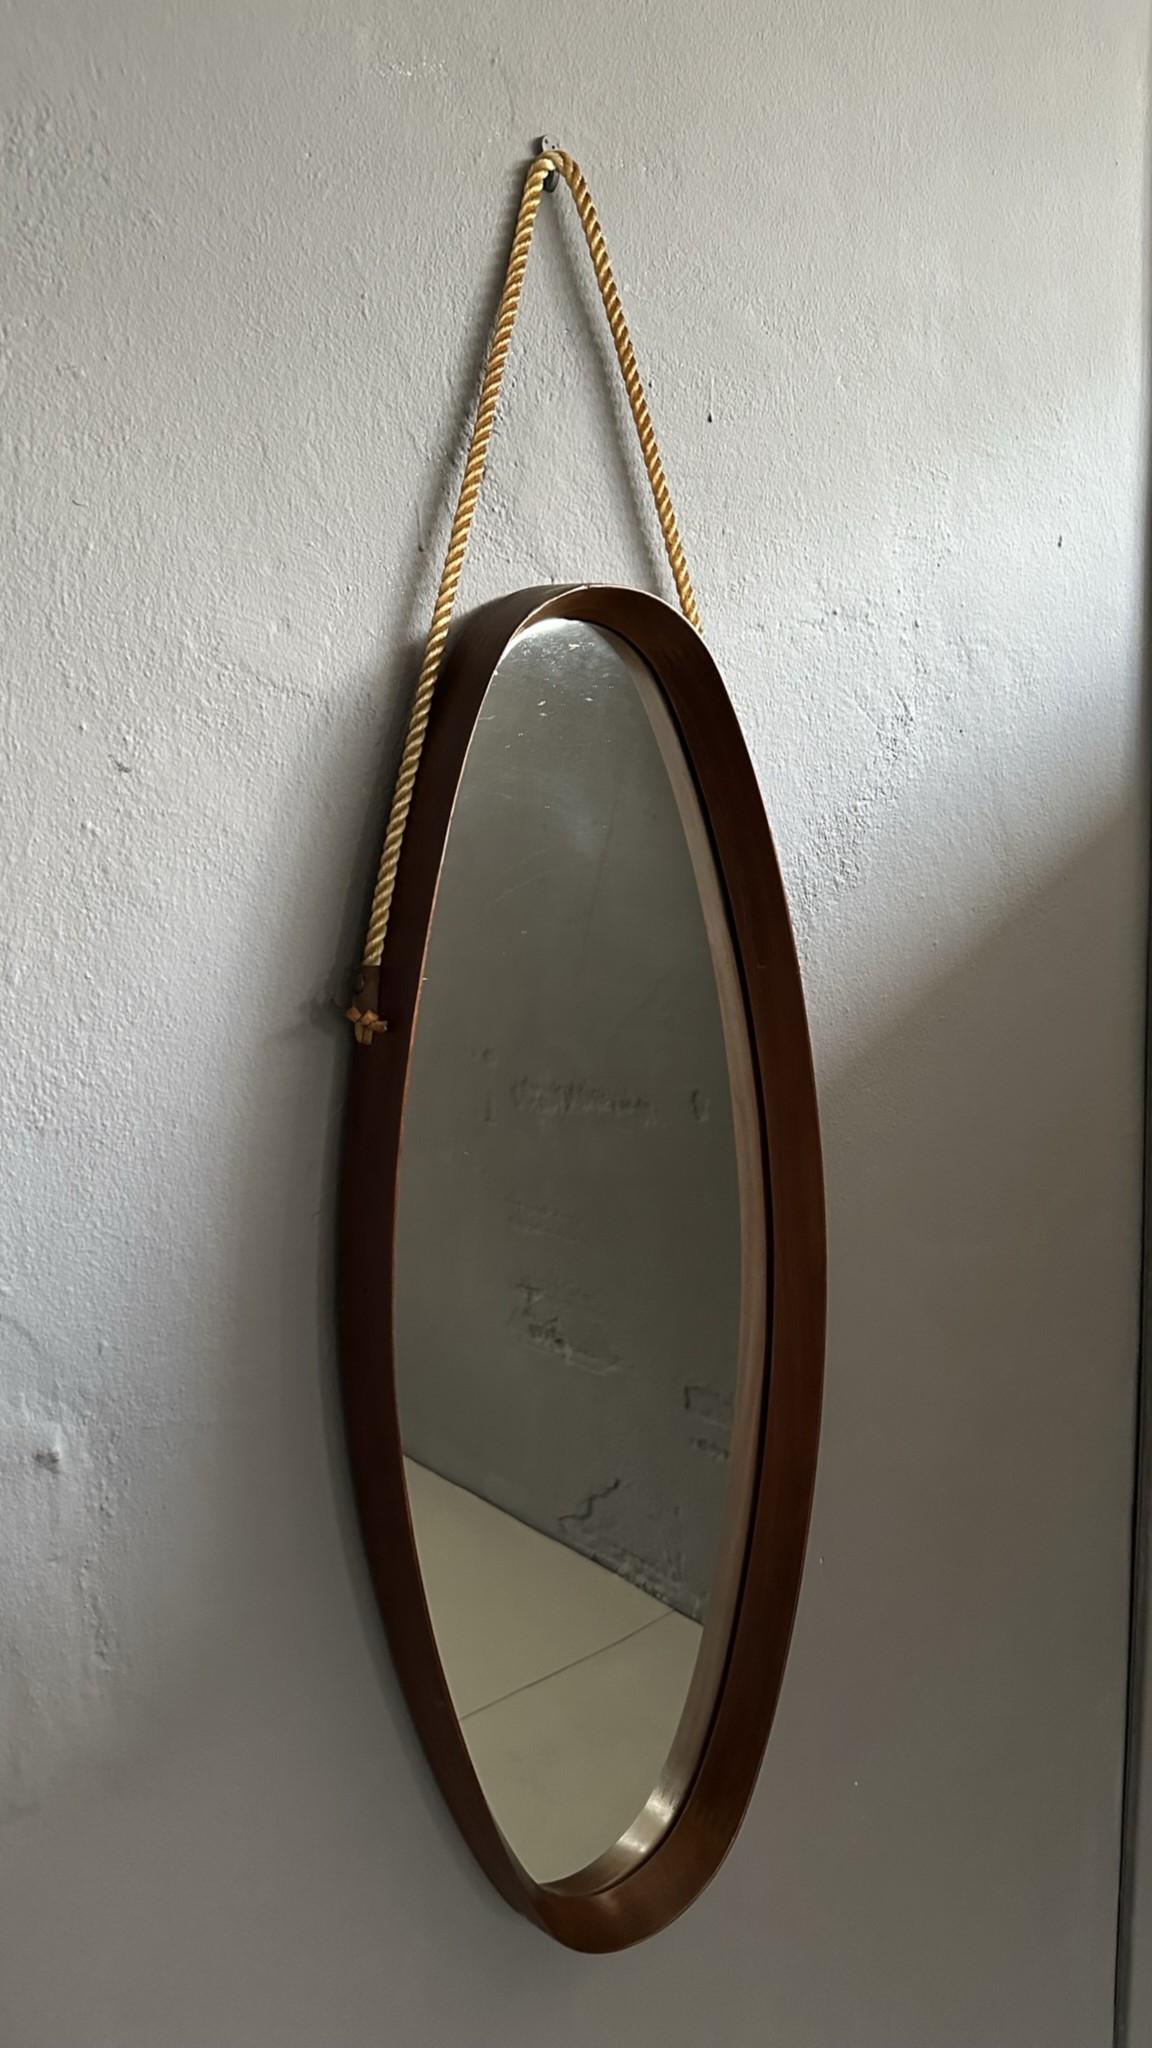 
Vintage oval mirror, with 1960s teak frame, Italian manufacturing.
The mirror has a rope for hanging on the wall.